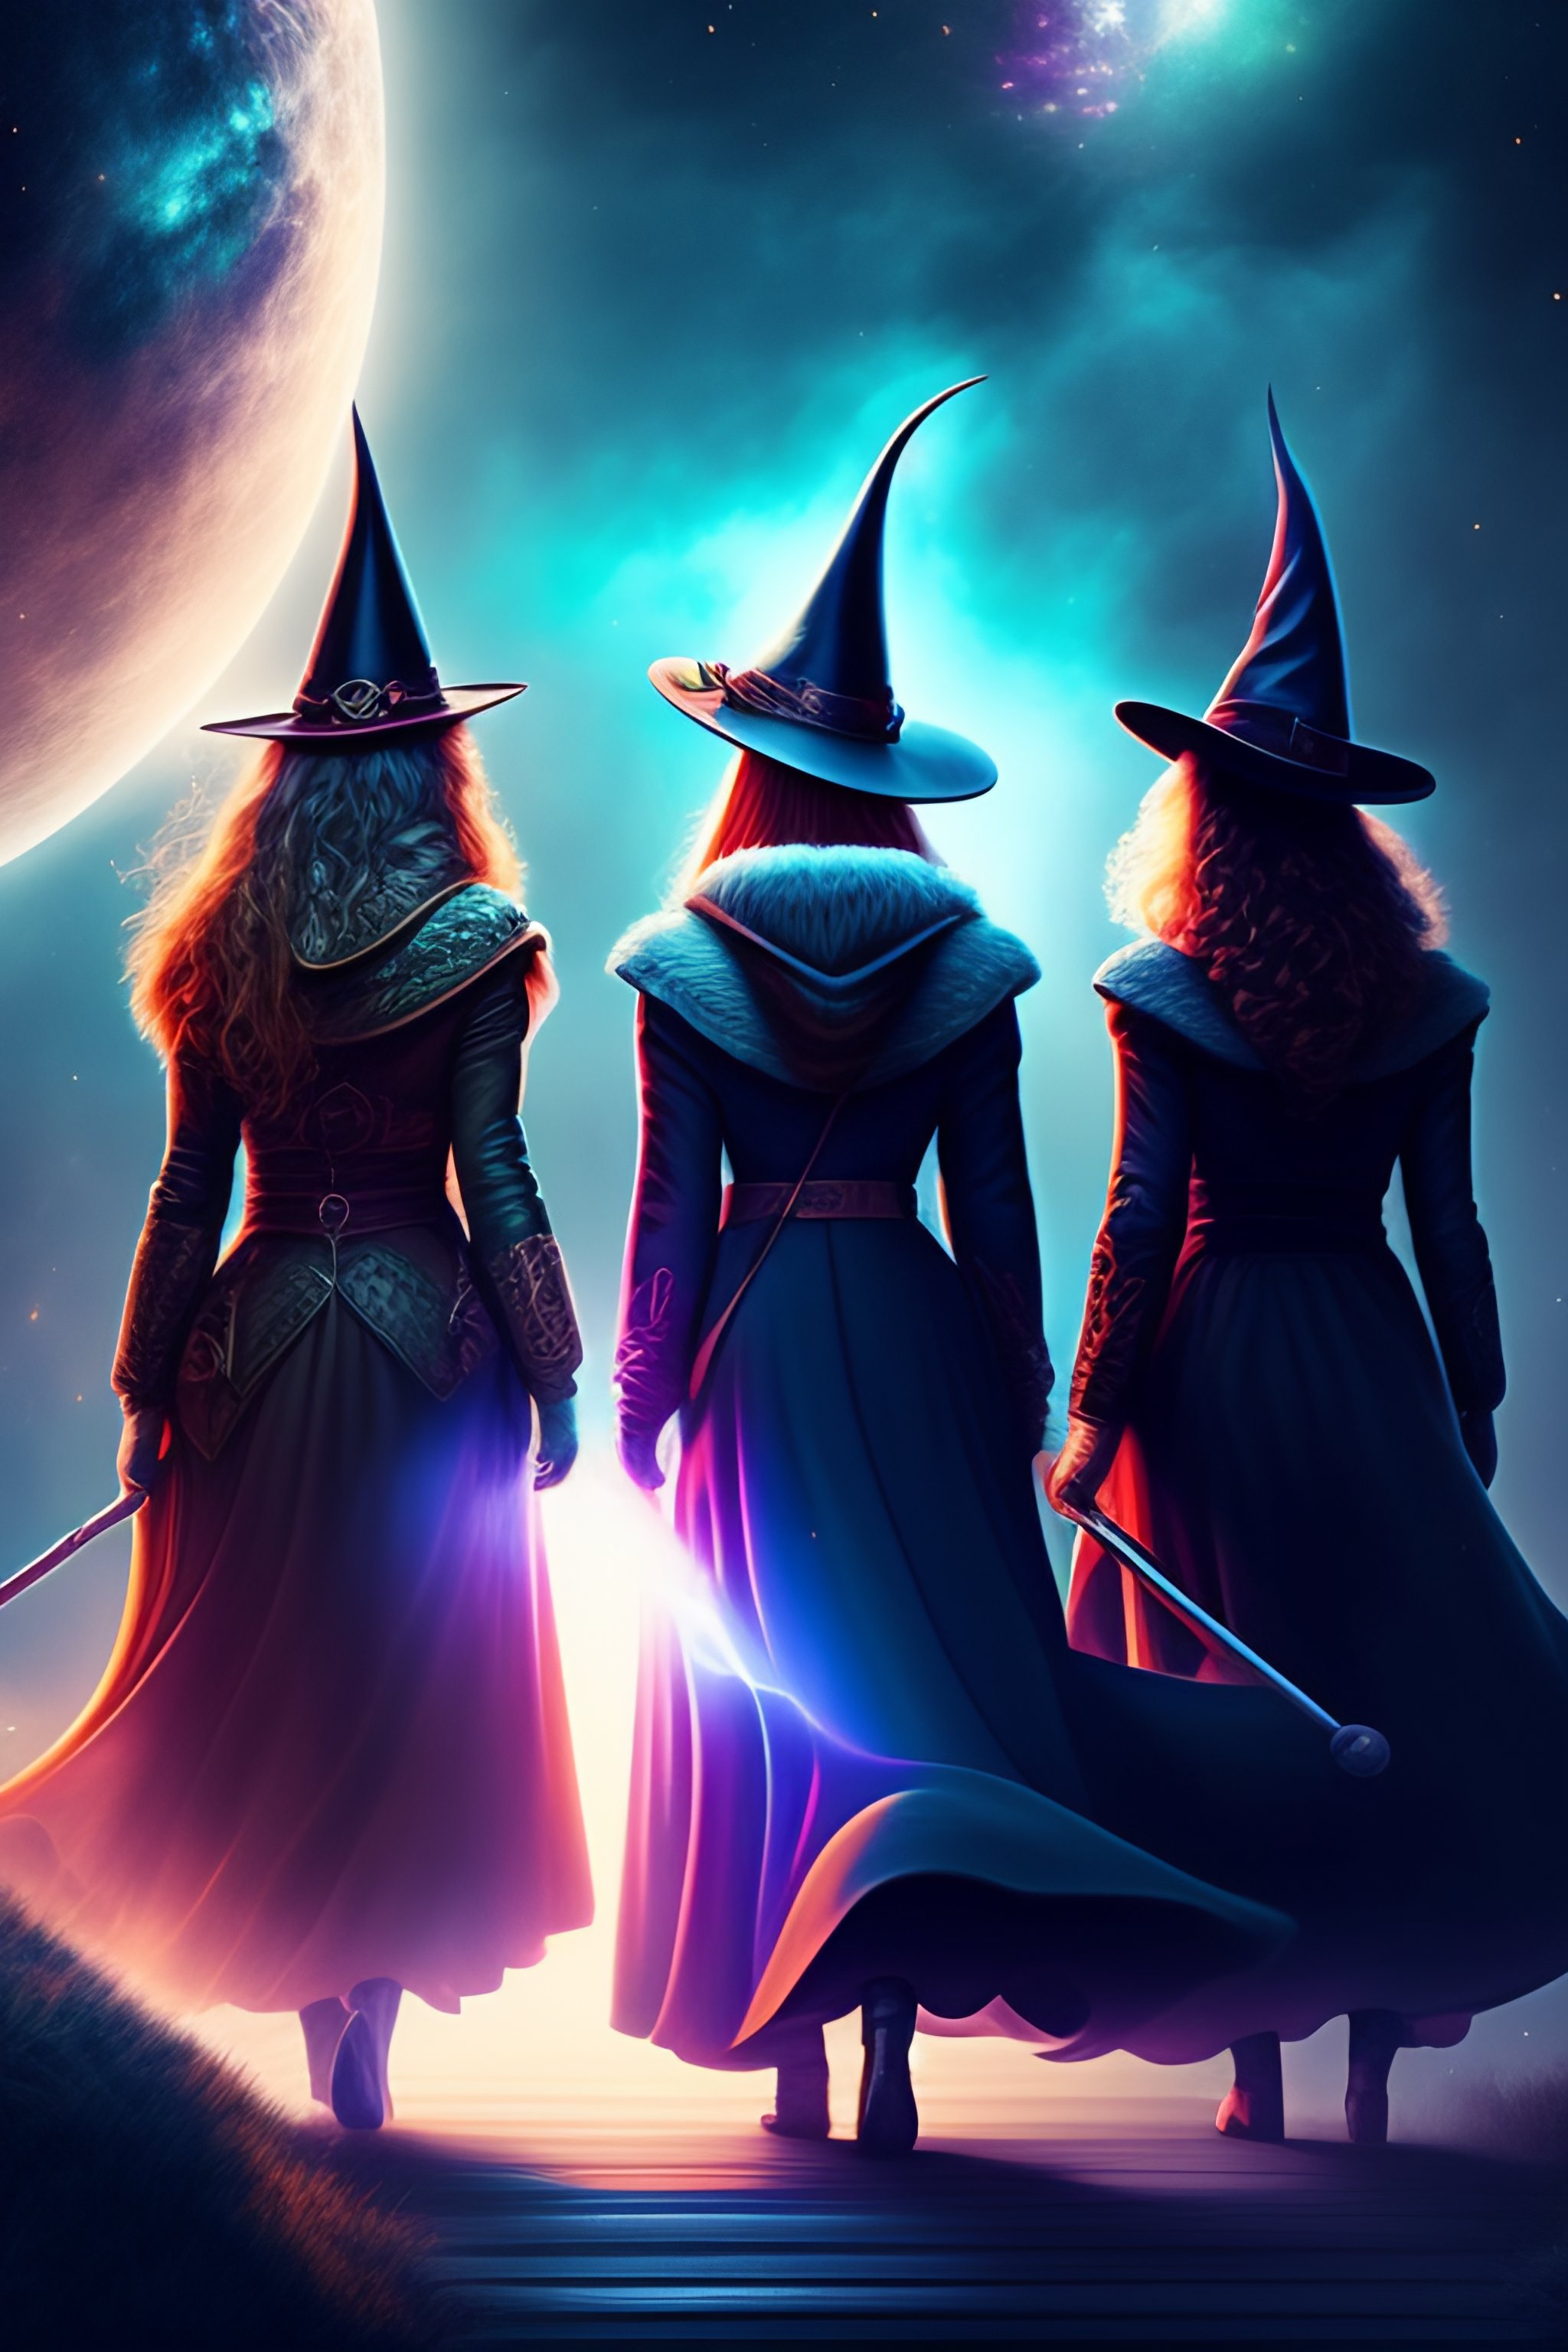 Lexica - A group of dimension traveling witches